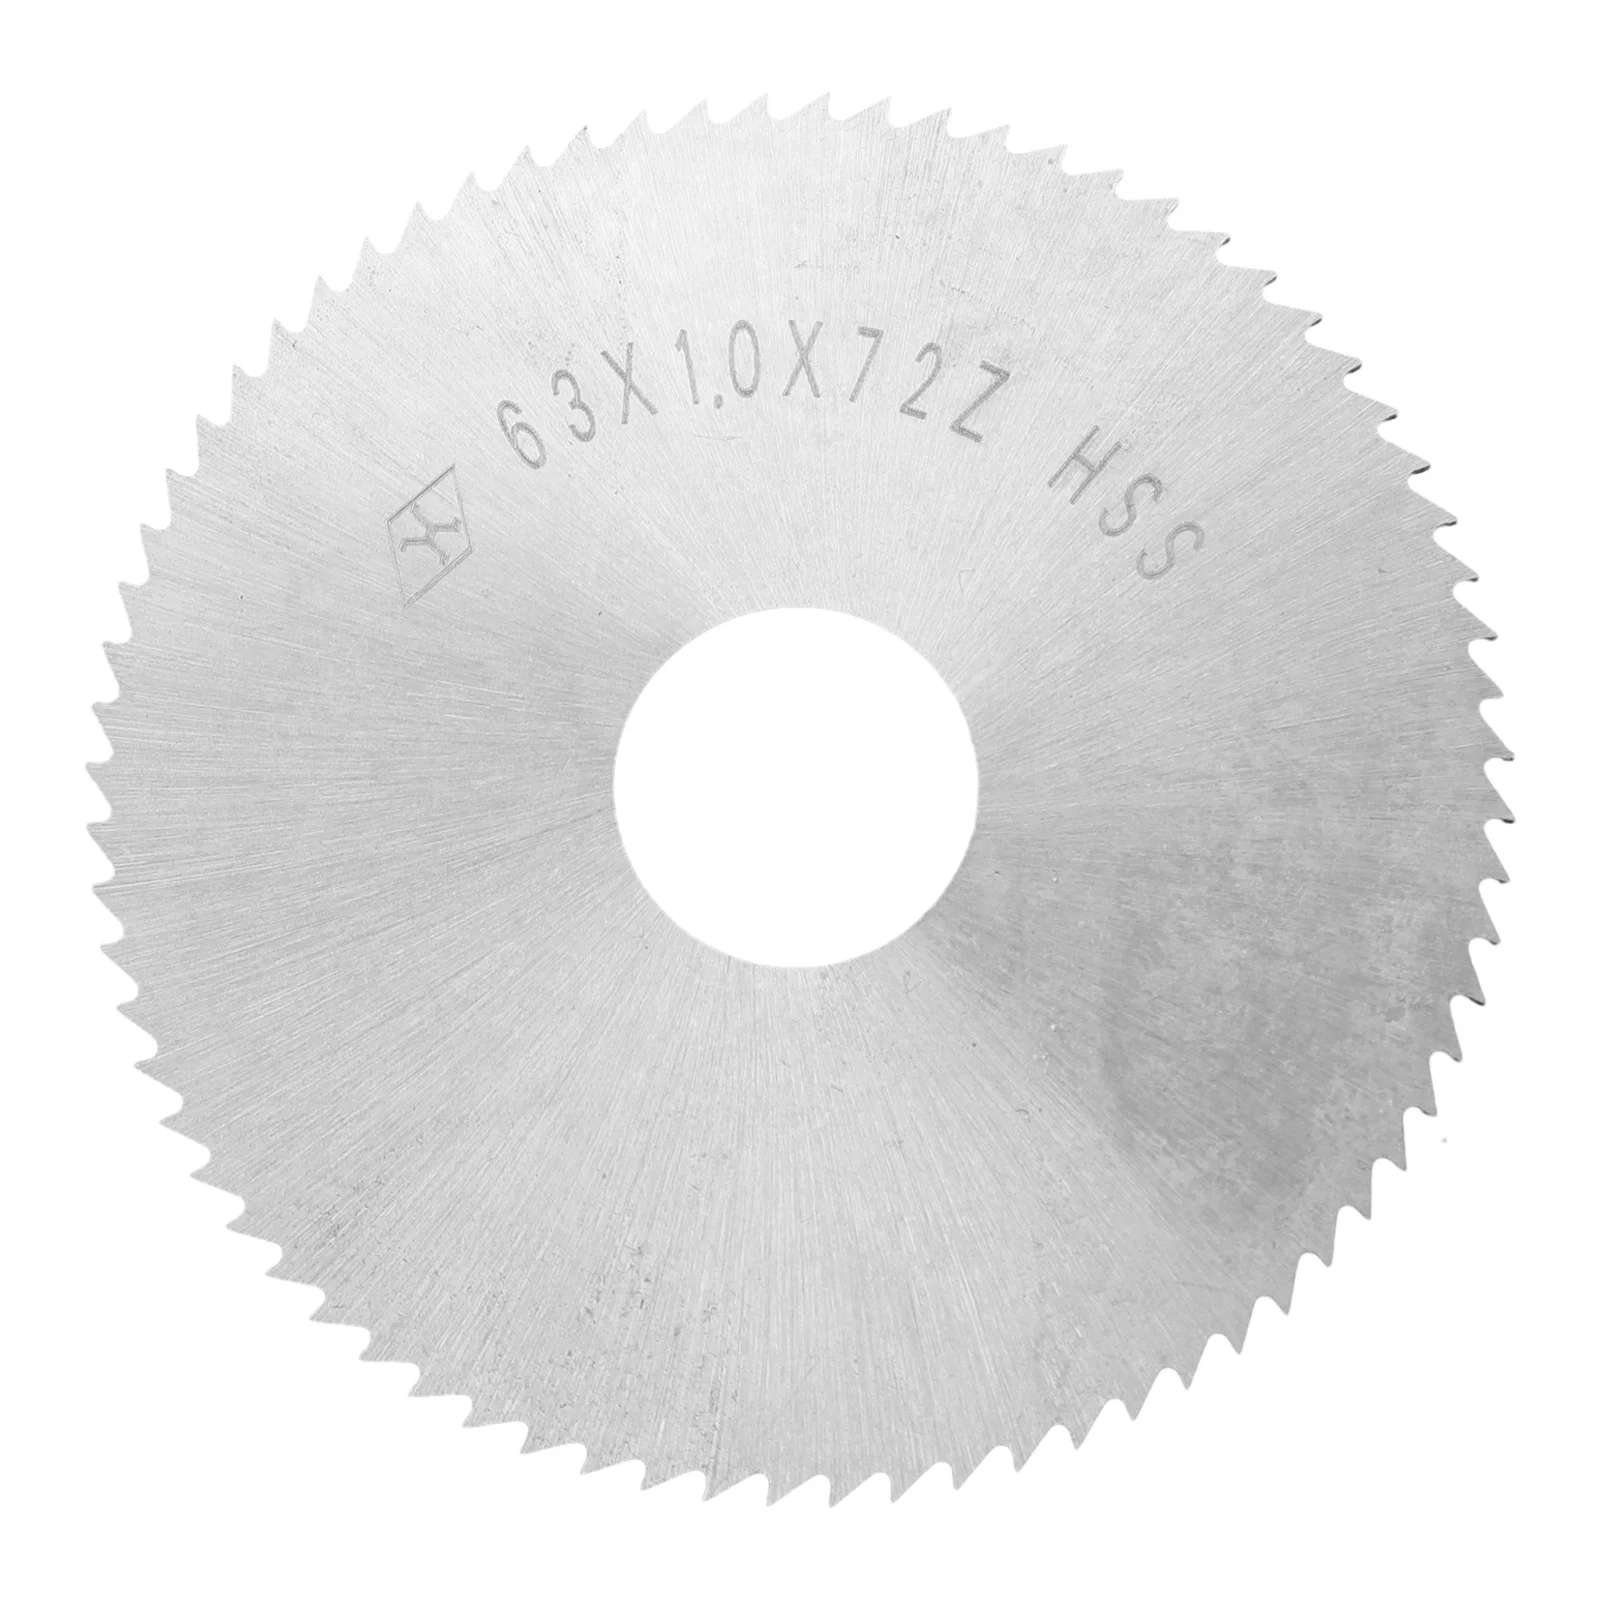 Fast Cutting Mm Bore Diameter Saw Blade Mm Bore Diameter Plastic Steel Jewelers Metals And Soft Other Light Copper 370w centrifugal fan impeller stainless steel impeller 8 inch turbine high temperature resistant fan blade diameter 203